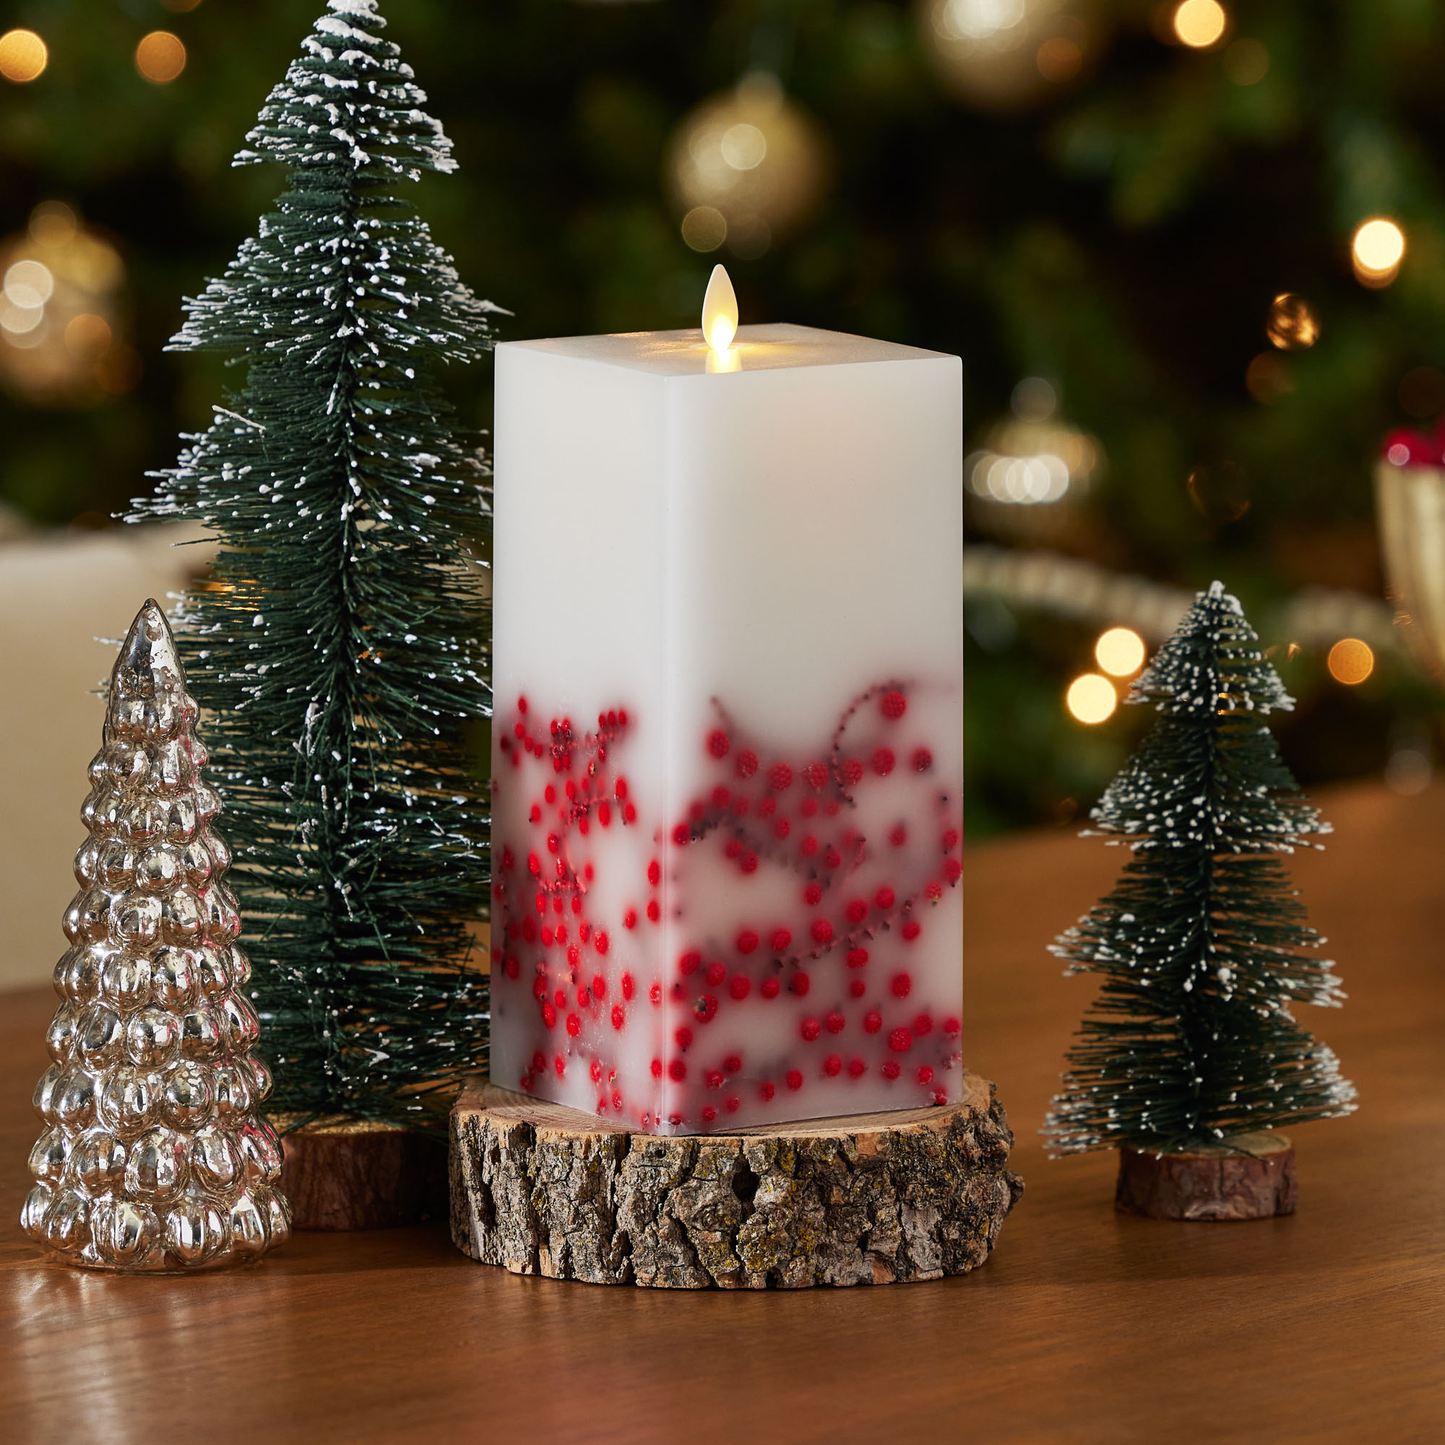 Embedded Red Berries Flameless Candle Square Pillar - Flat Top